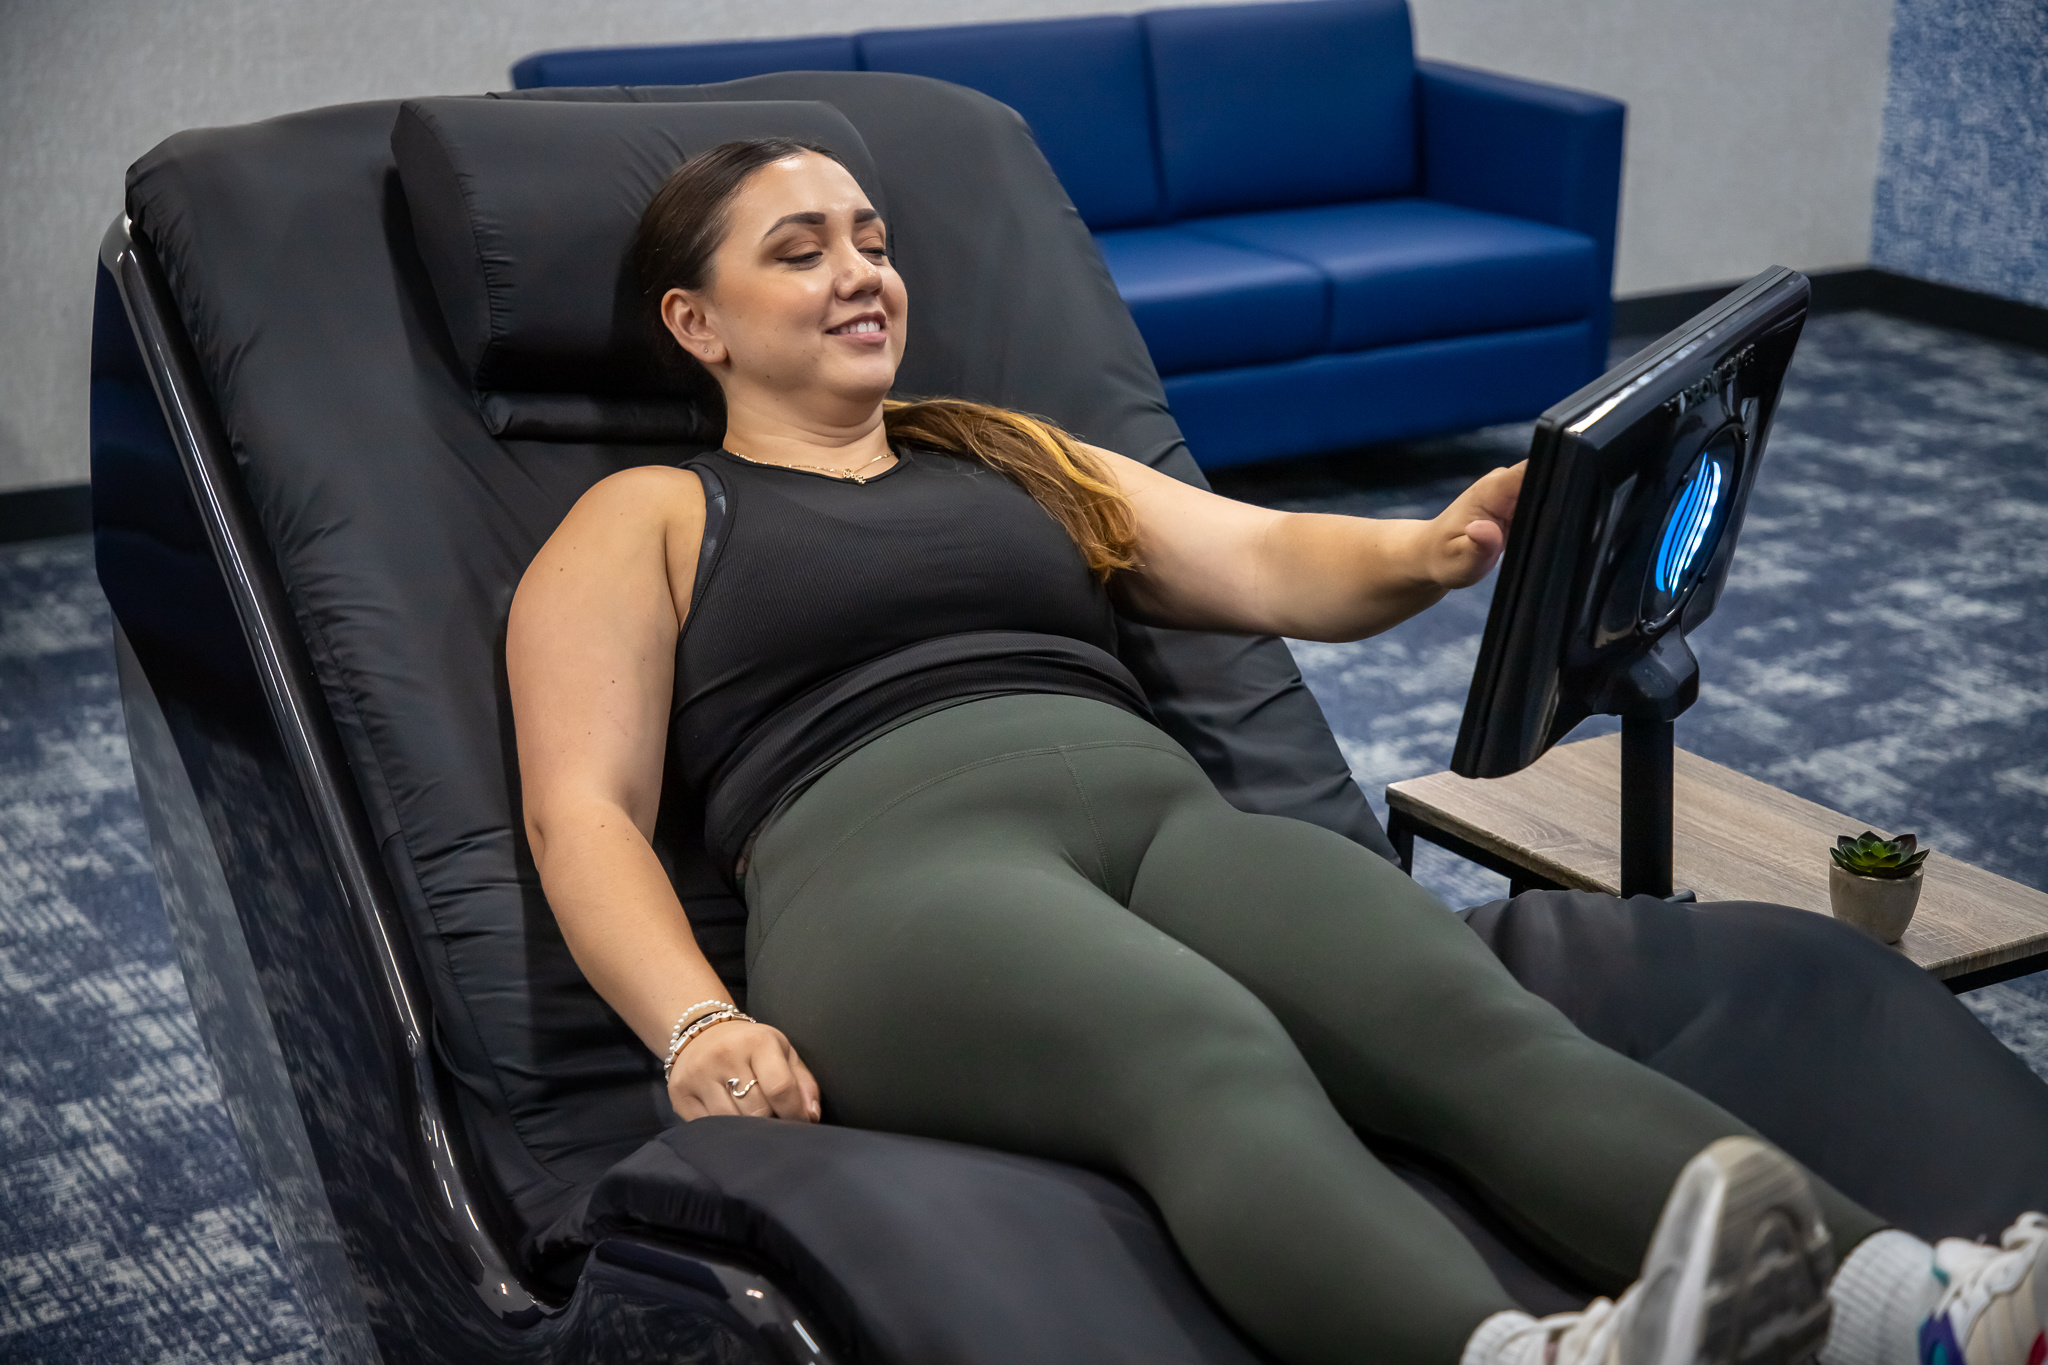 Get a Massage after your workout with a HydroMassage chair